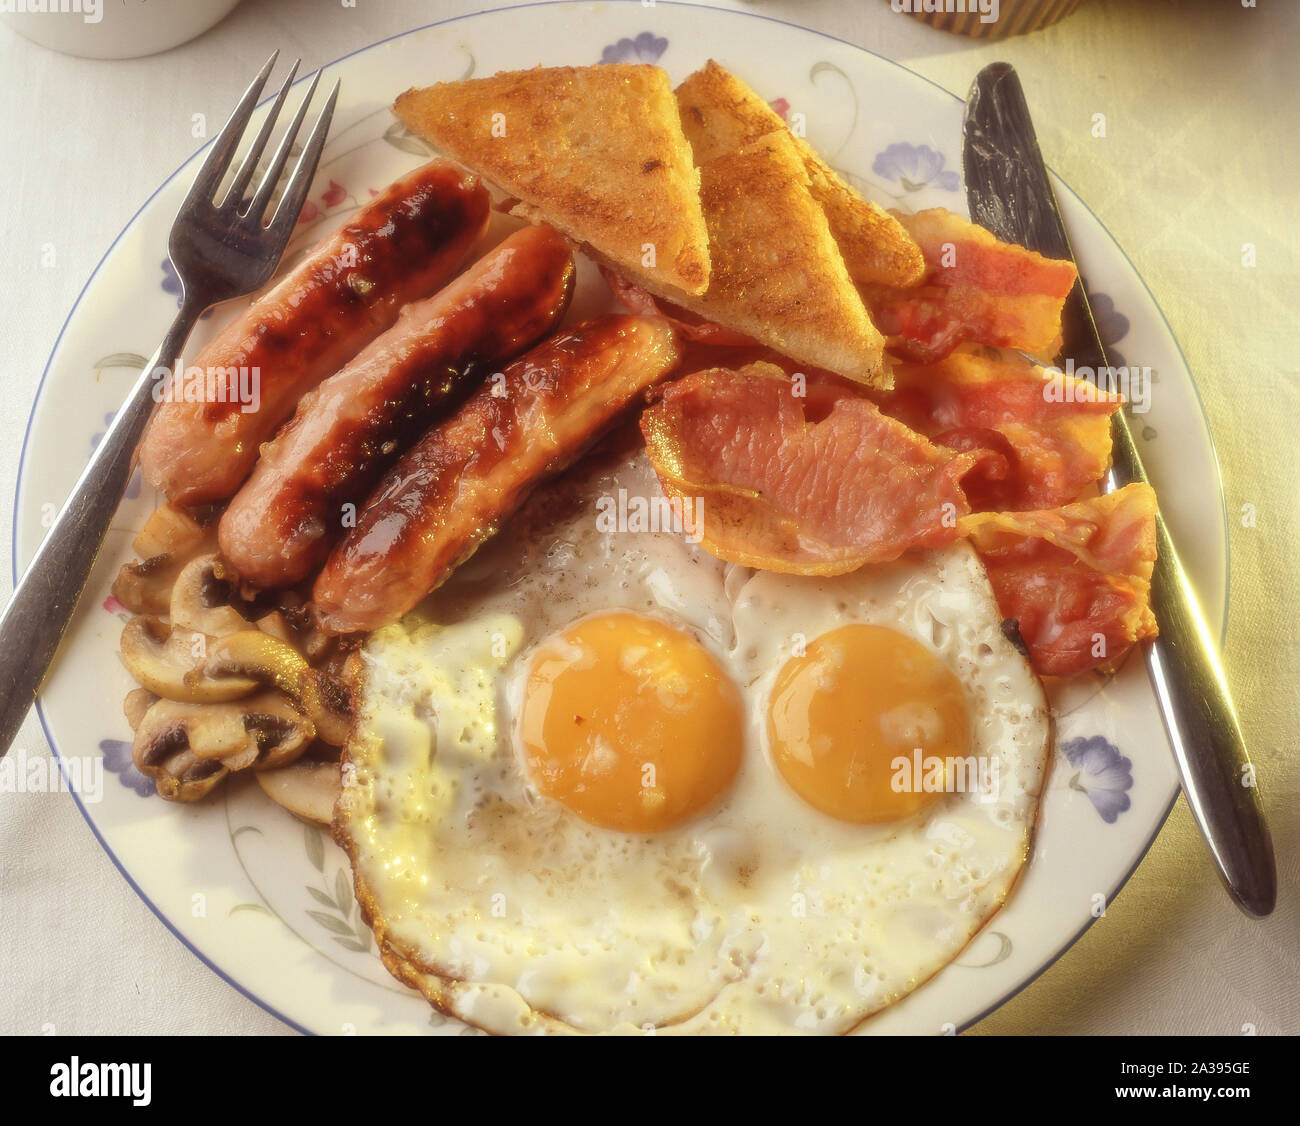 Full english breakfast with fried eggs, sauasages, bacon and fried bread, Berkshire, England, United Kingdom Stock Photo